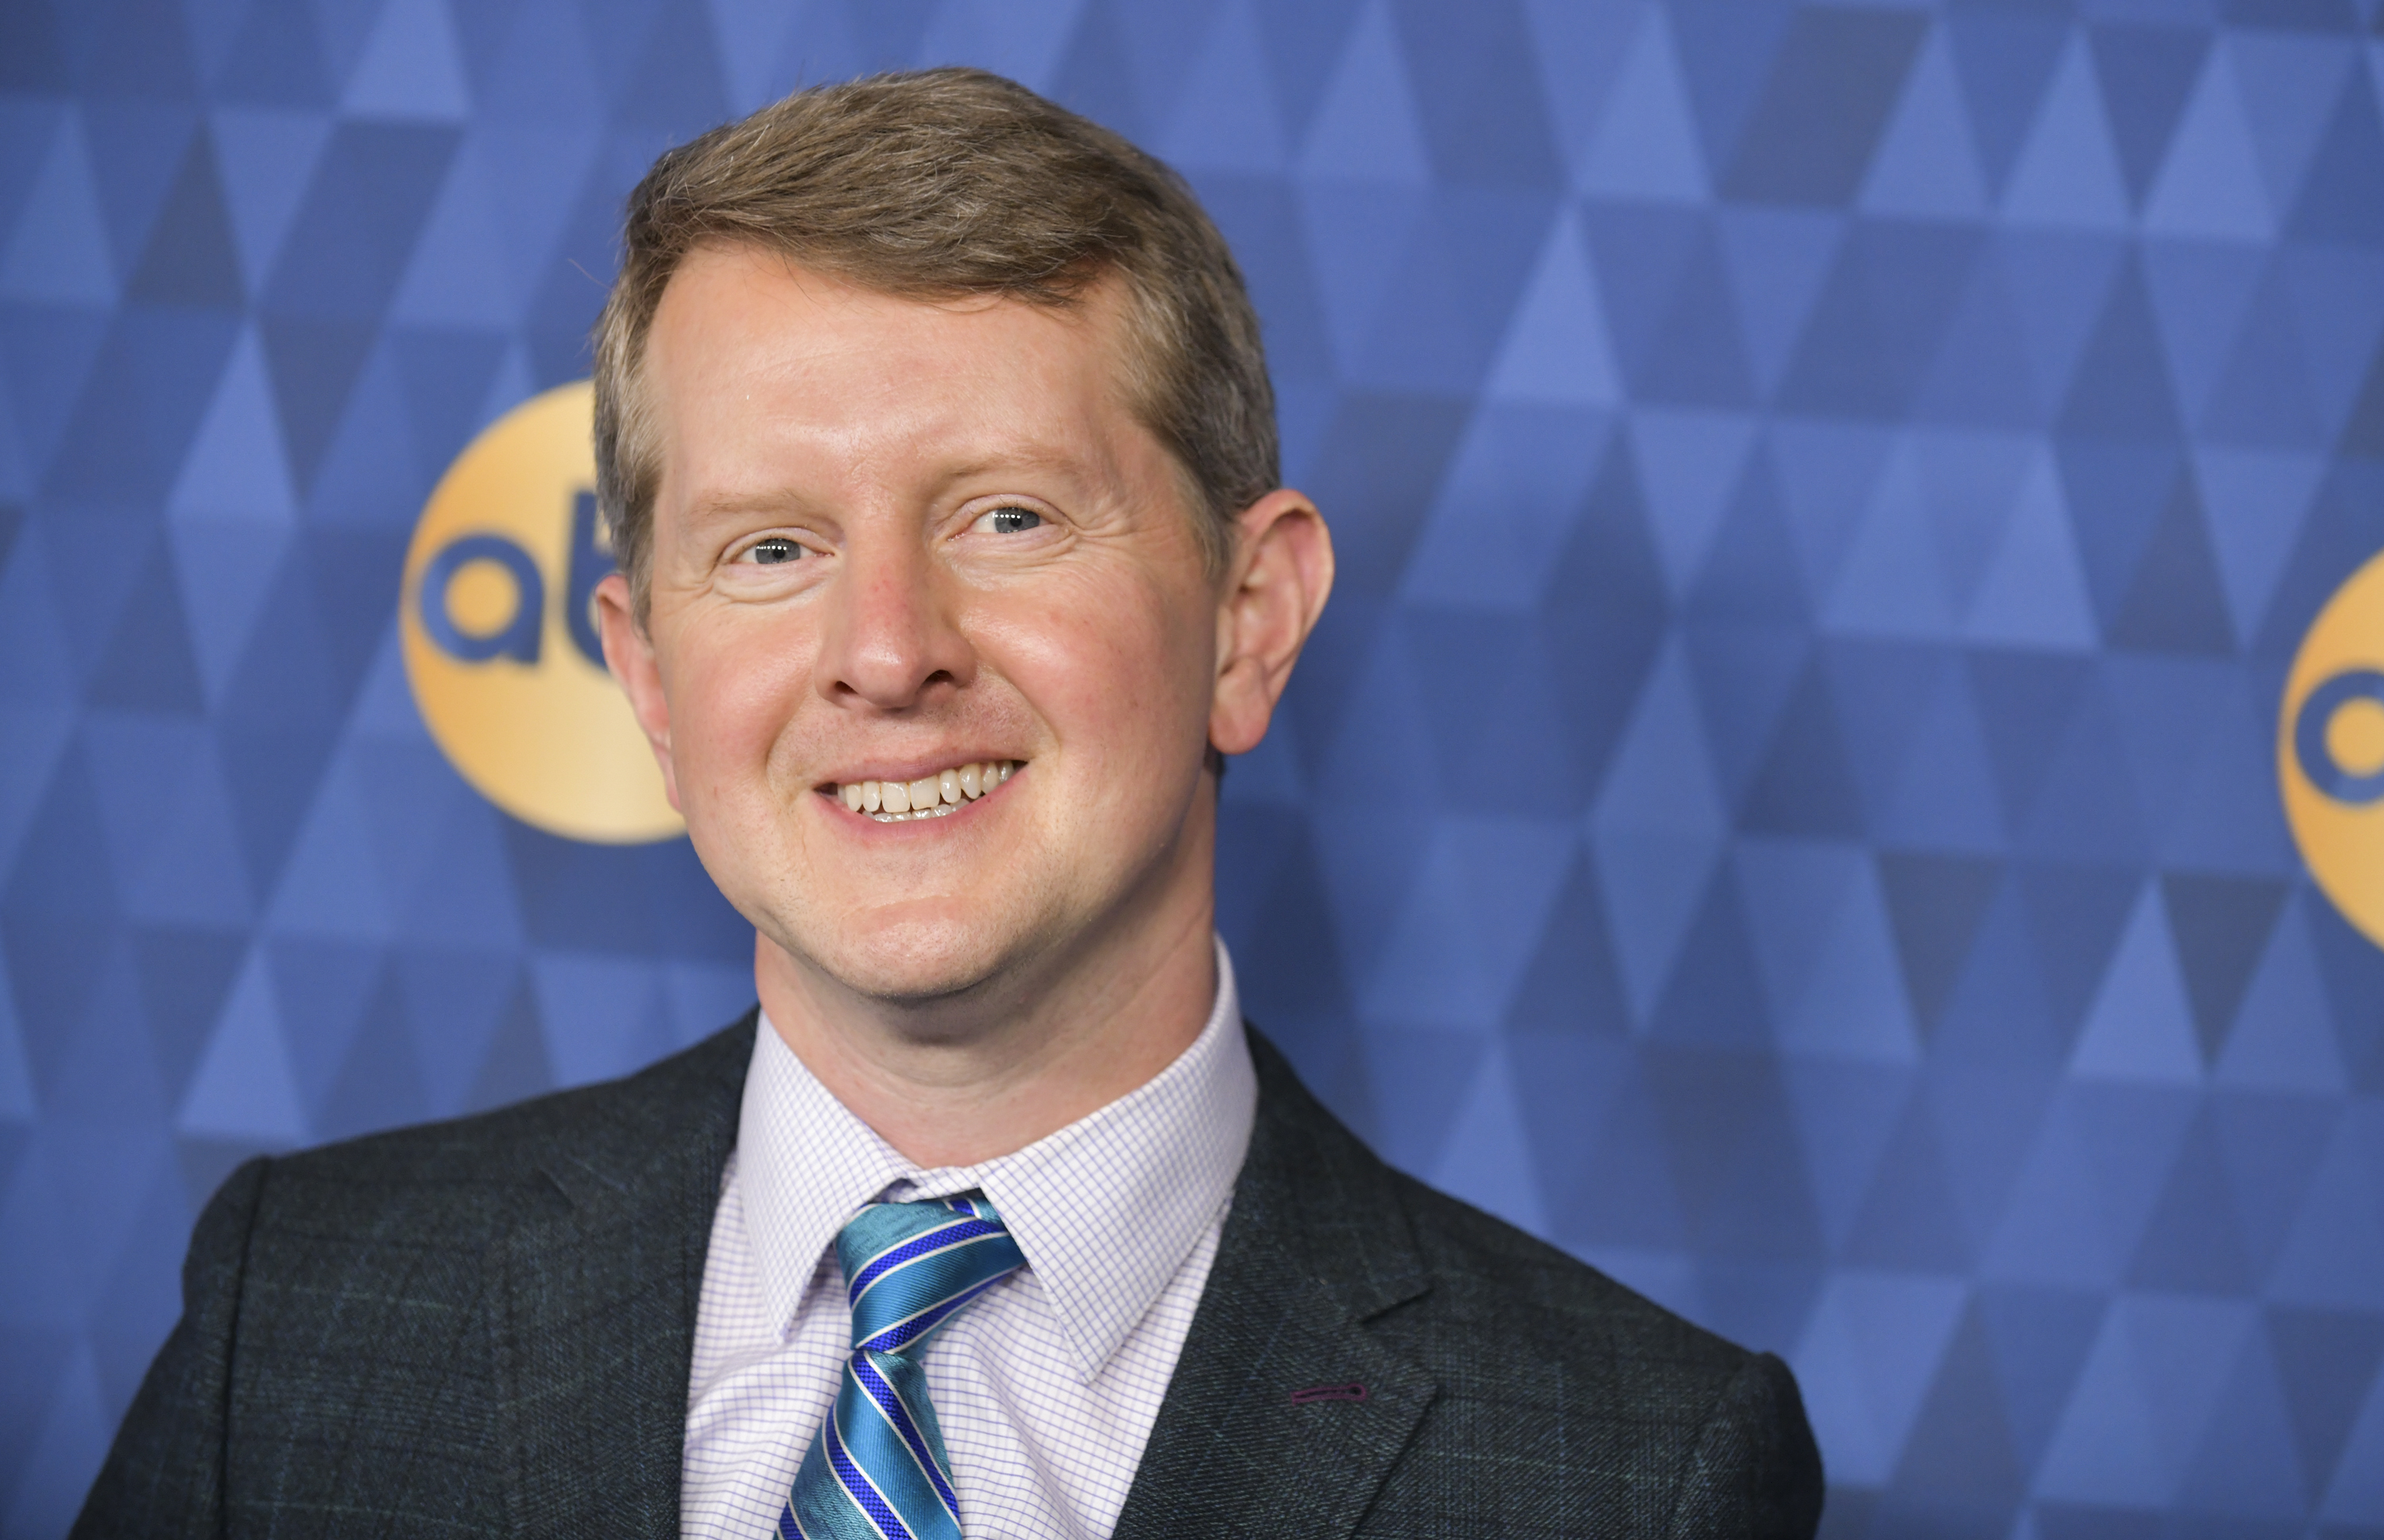 'Jeopardy!' GOAT Ken Jennings attends the ABC Television's Winter Press Tour 2020 at The Langham Huntington, Pasadena